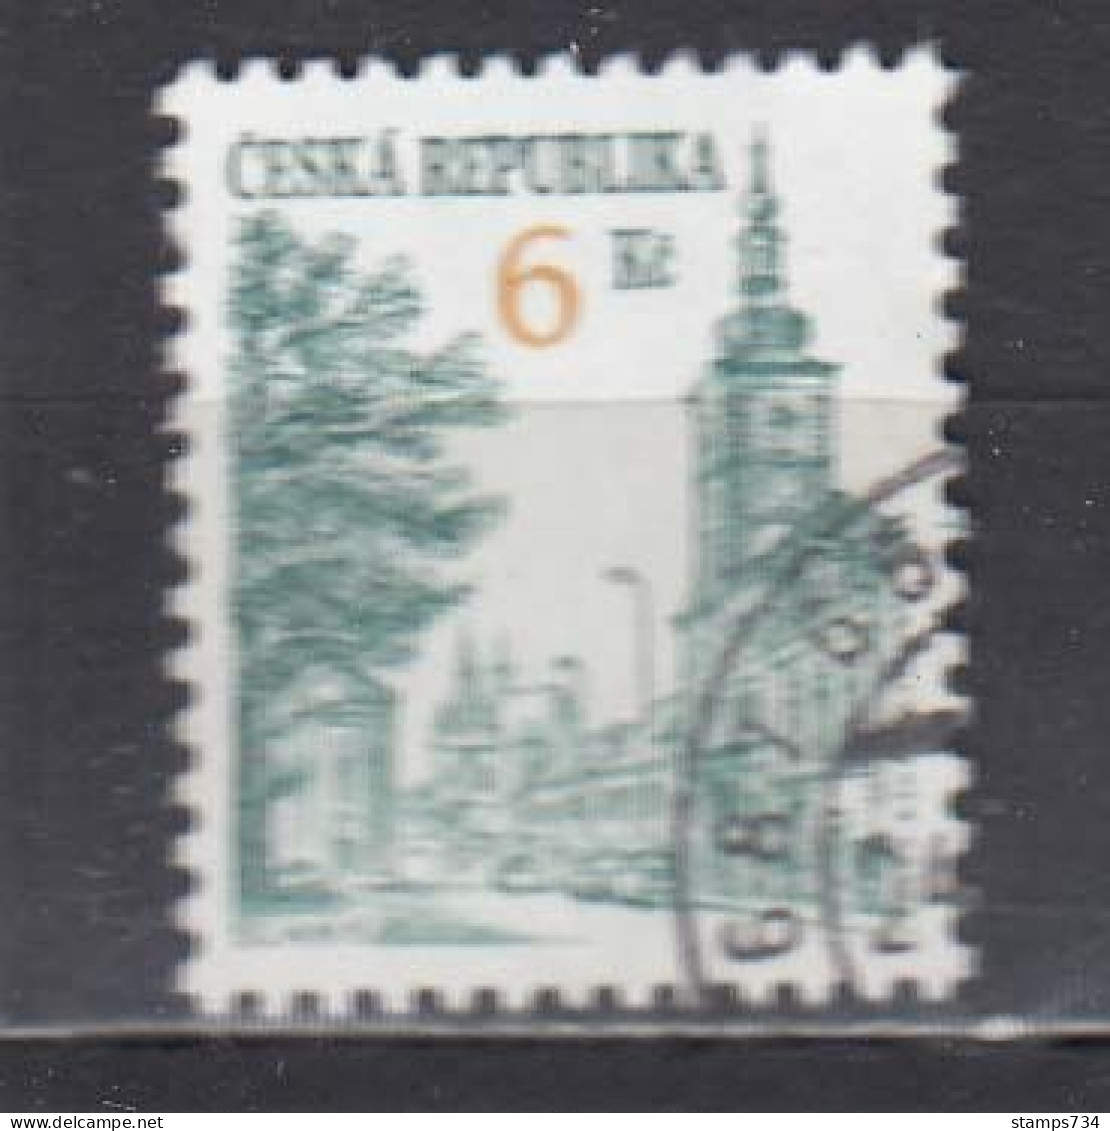 Czech Rep. 1994 - Regular Stamp: Cities, 6 Kr., Mi-Nr. 52, Used - Used Stamps